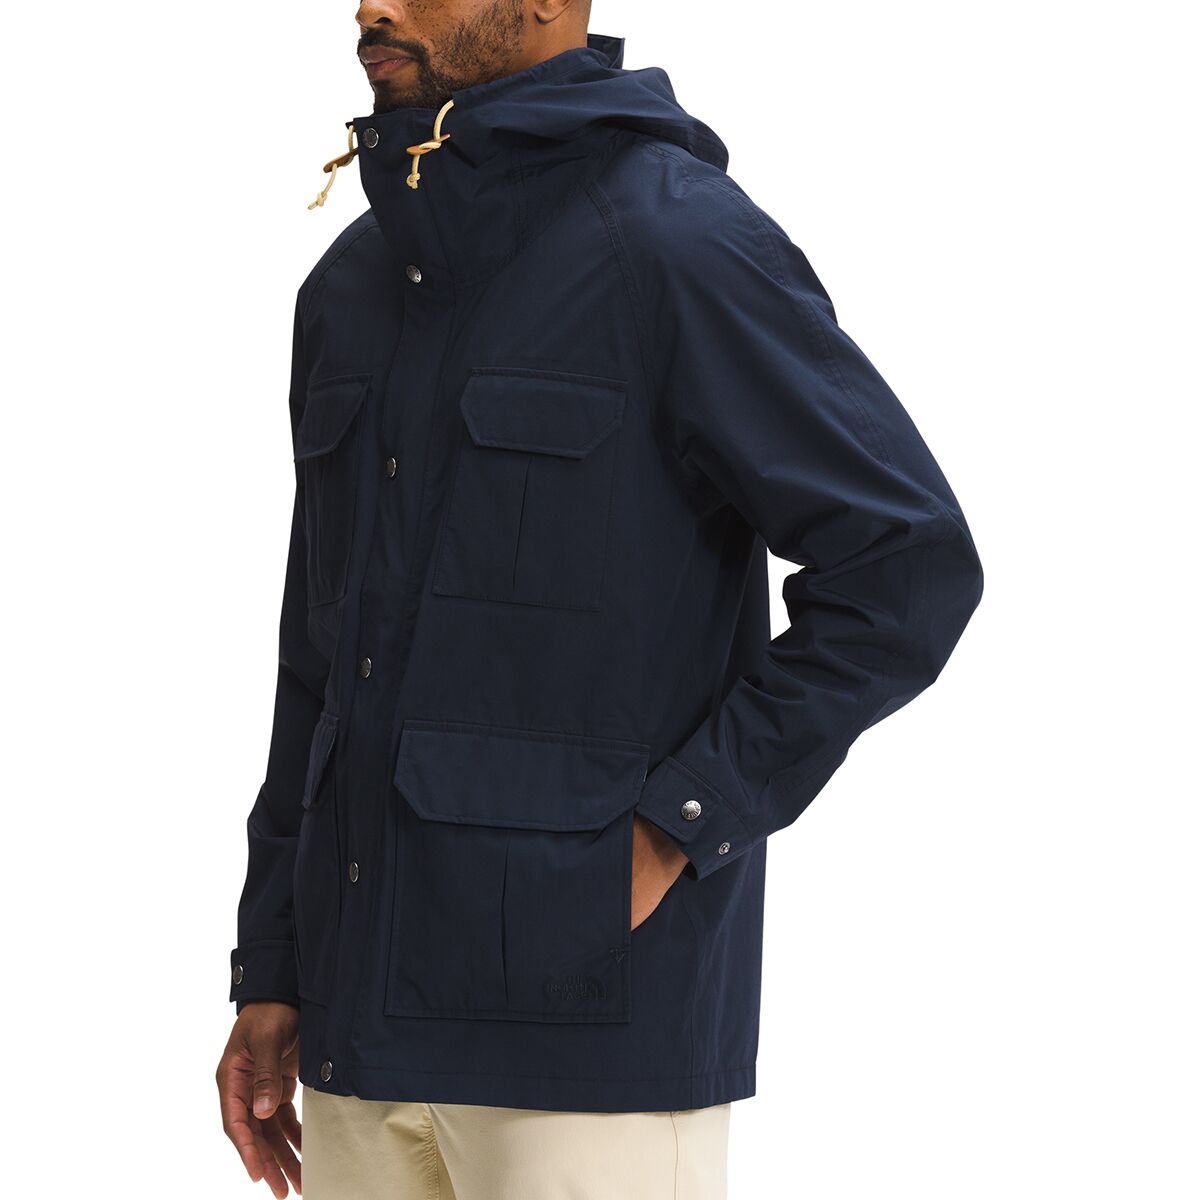 The North Face Men's DryVent Mountain Parka - Moosejaw